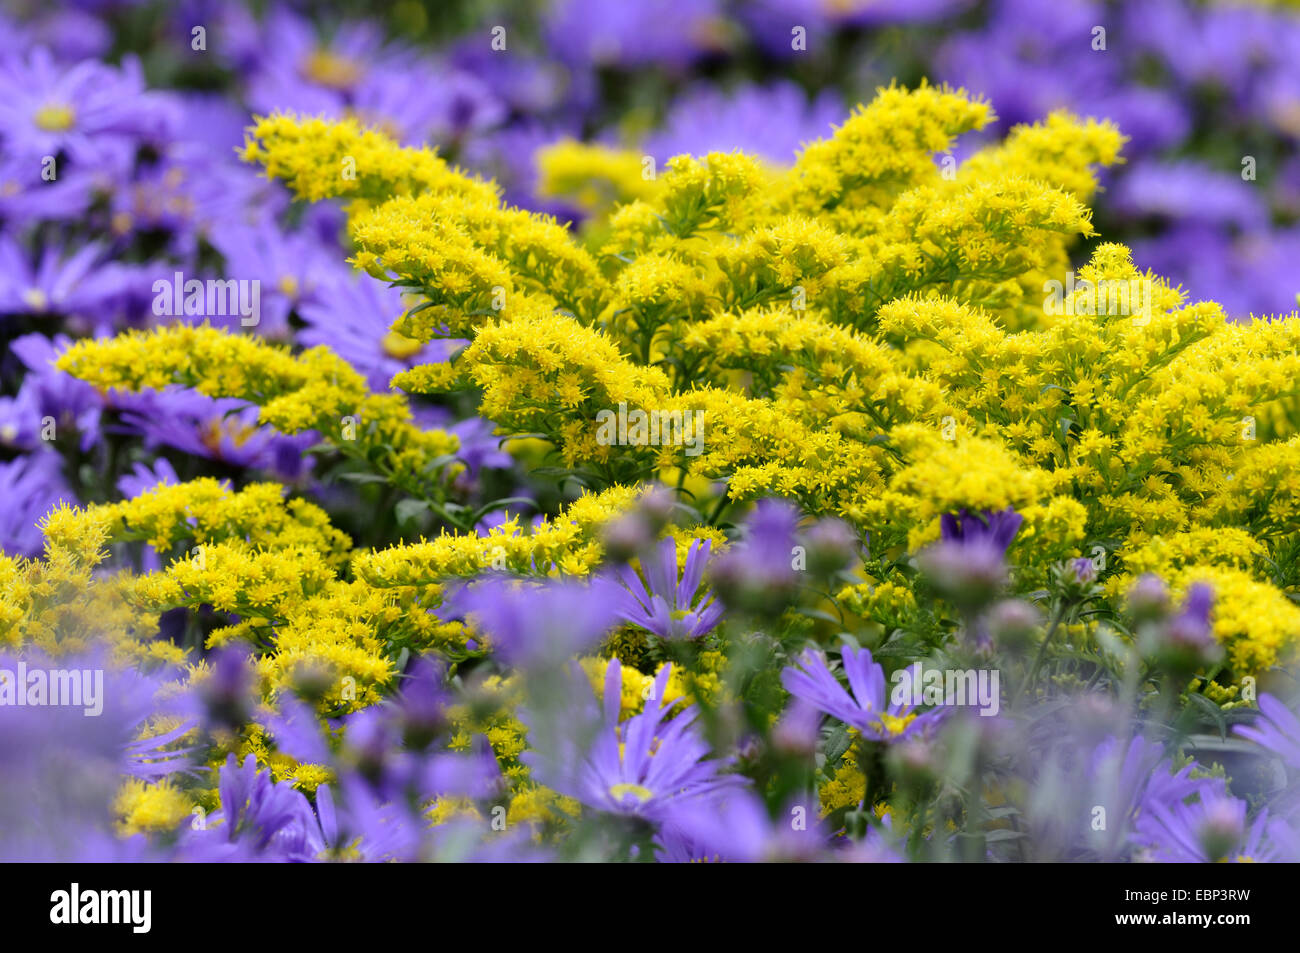 early golden-rod, late goldenrod, smooth goldenrod, smooth three-ribbed goldenrod (Solidago gigantea), in a flowerbed with asters Stock Photo